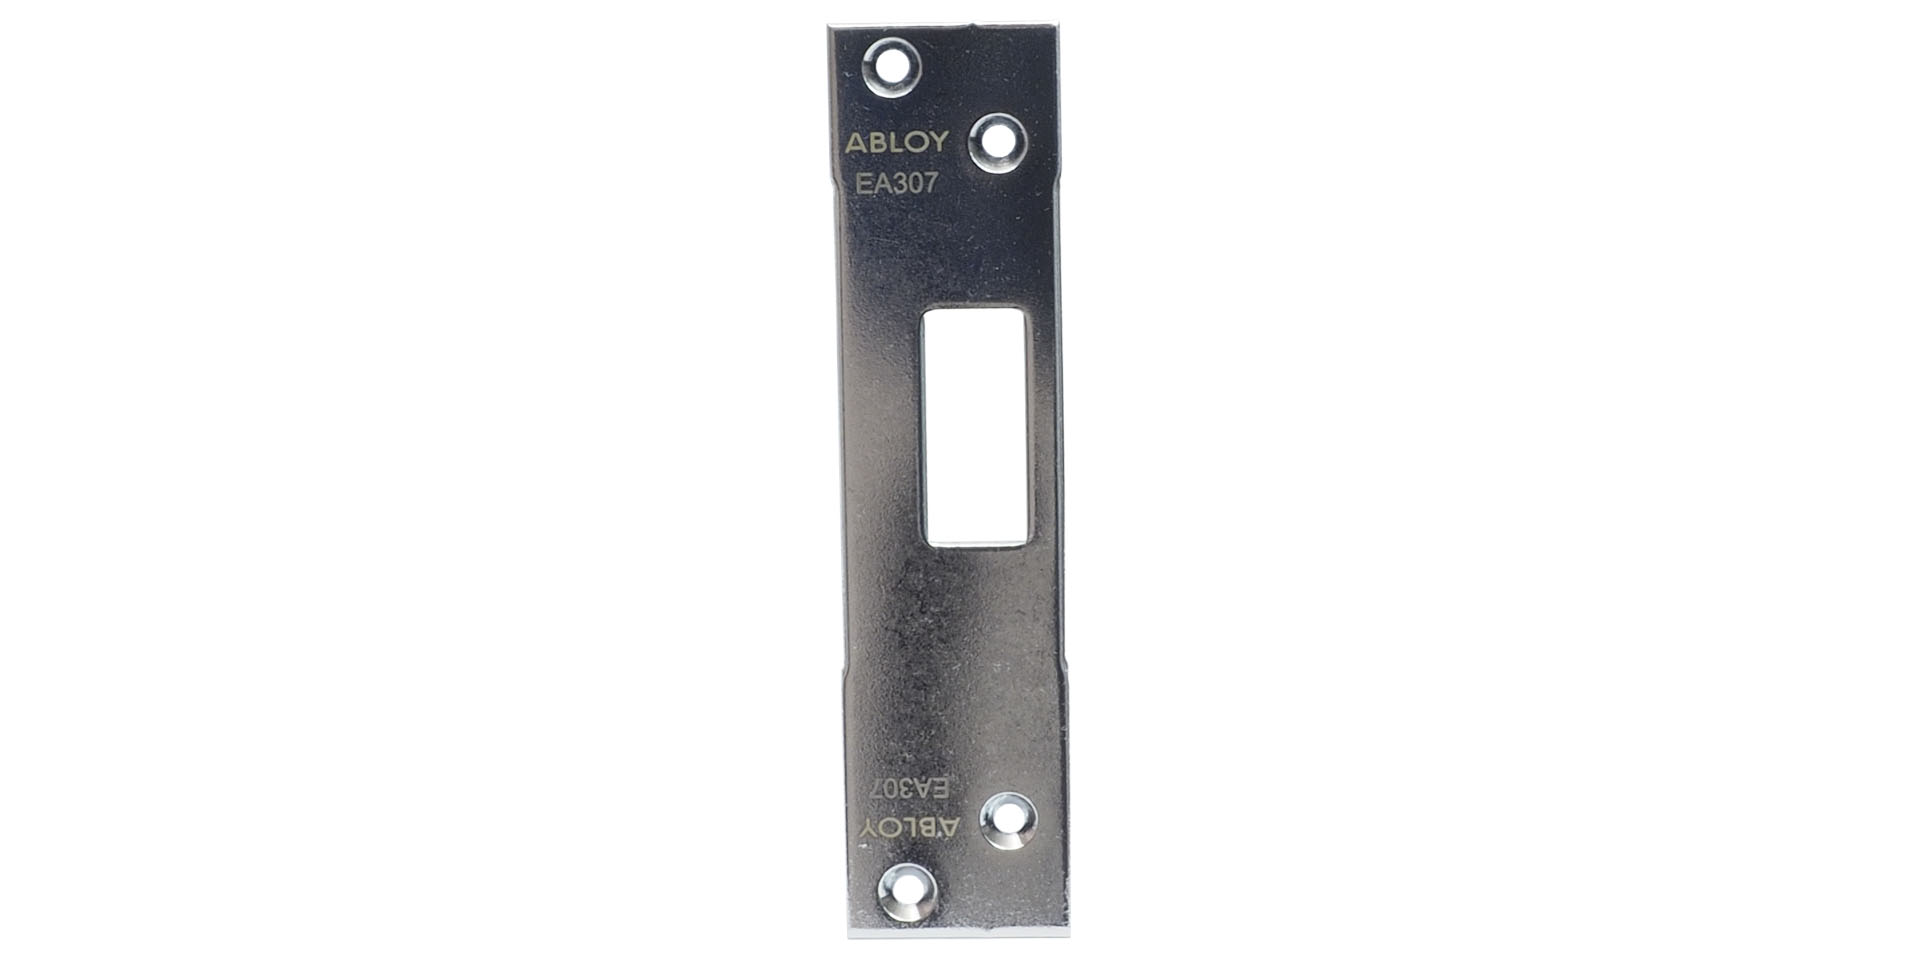 ABLOY Strike Plate - EL402 Family | ABLOY for Trust